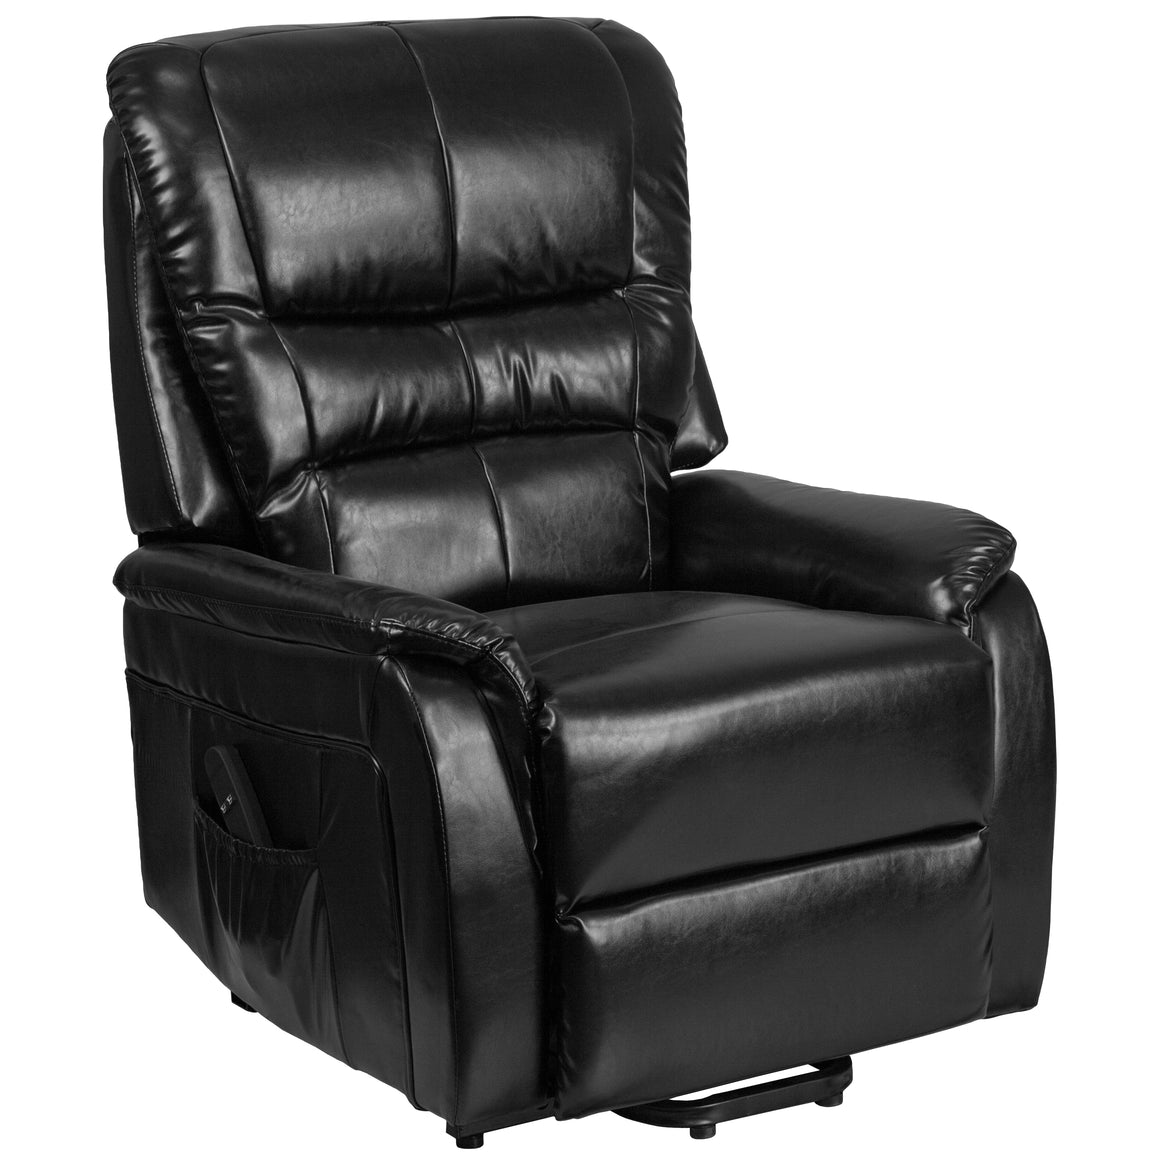 Power Lift Assist Recliner Chair Contemporary Style - Black - Man Cave Boutique